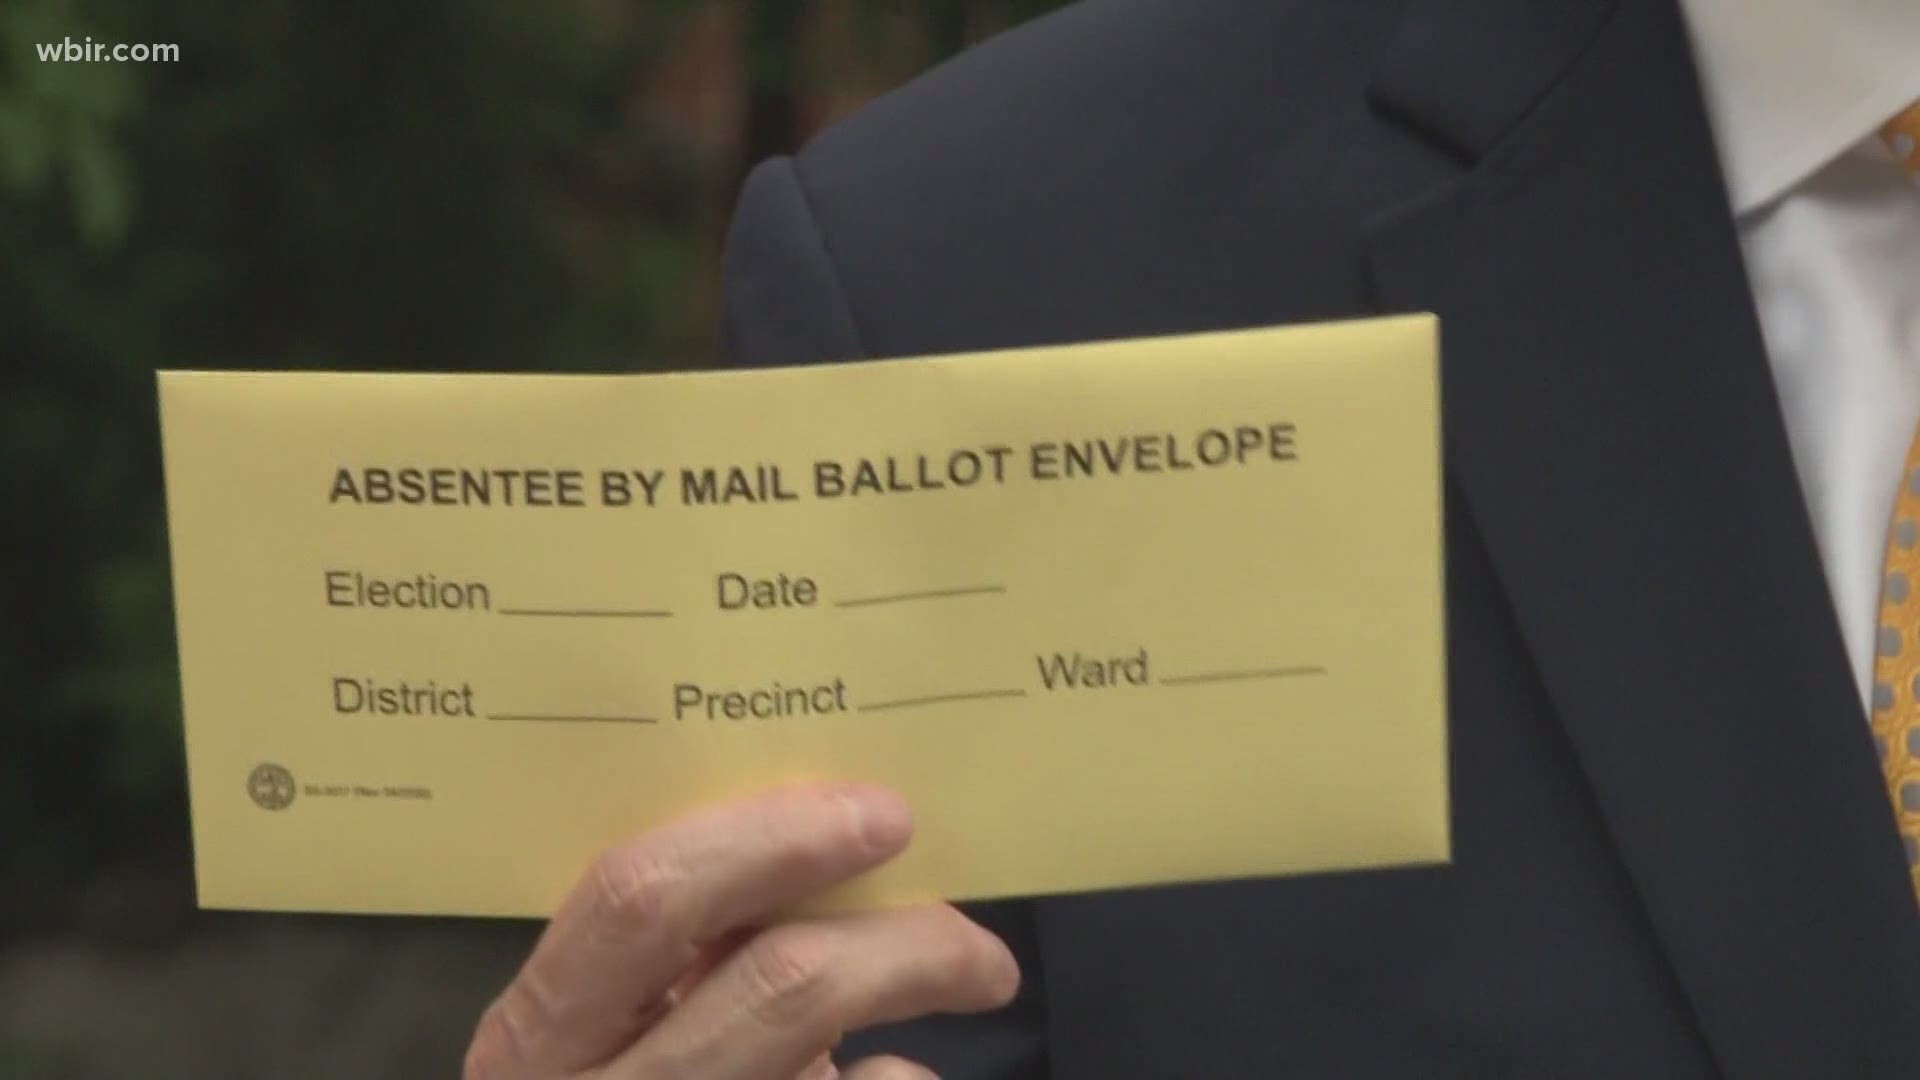 Knox County says its election staff is trained to find and void false ballots before they're counted.